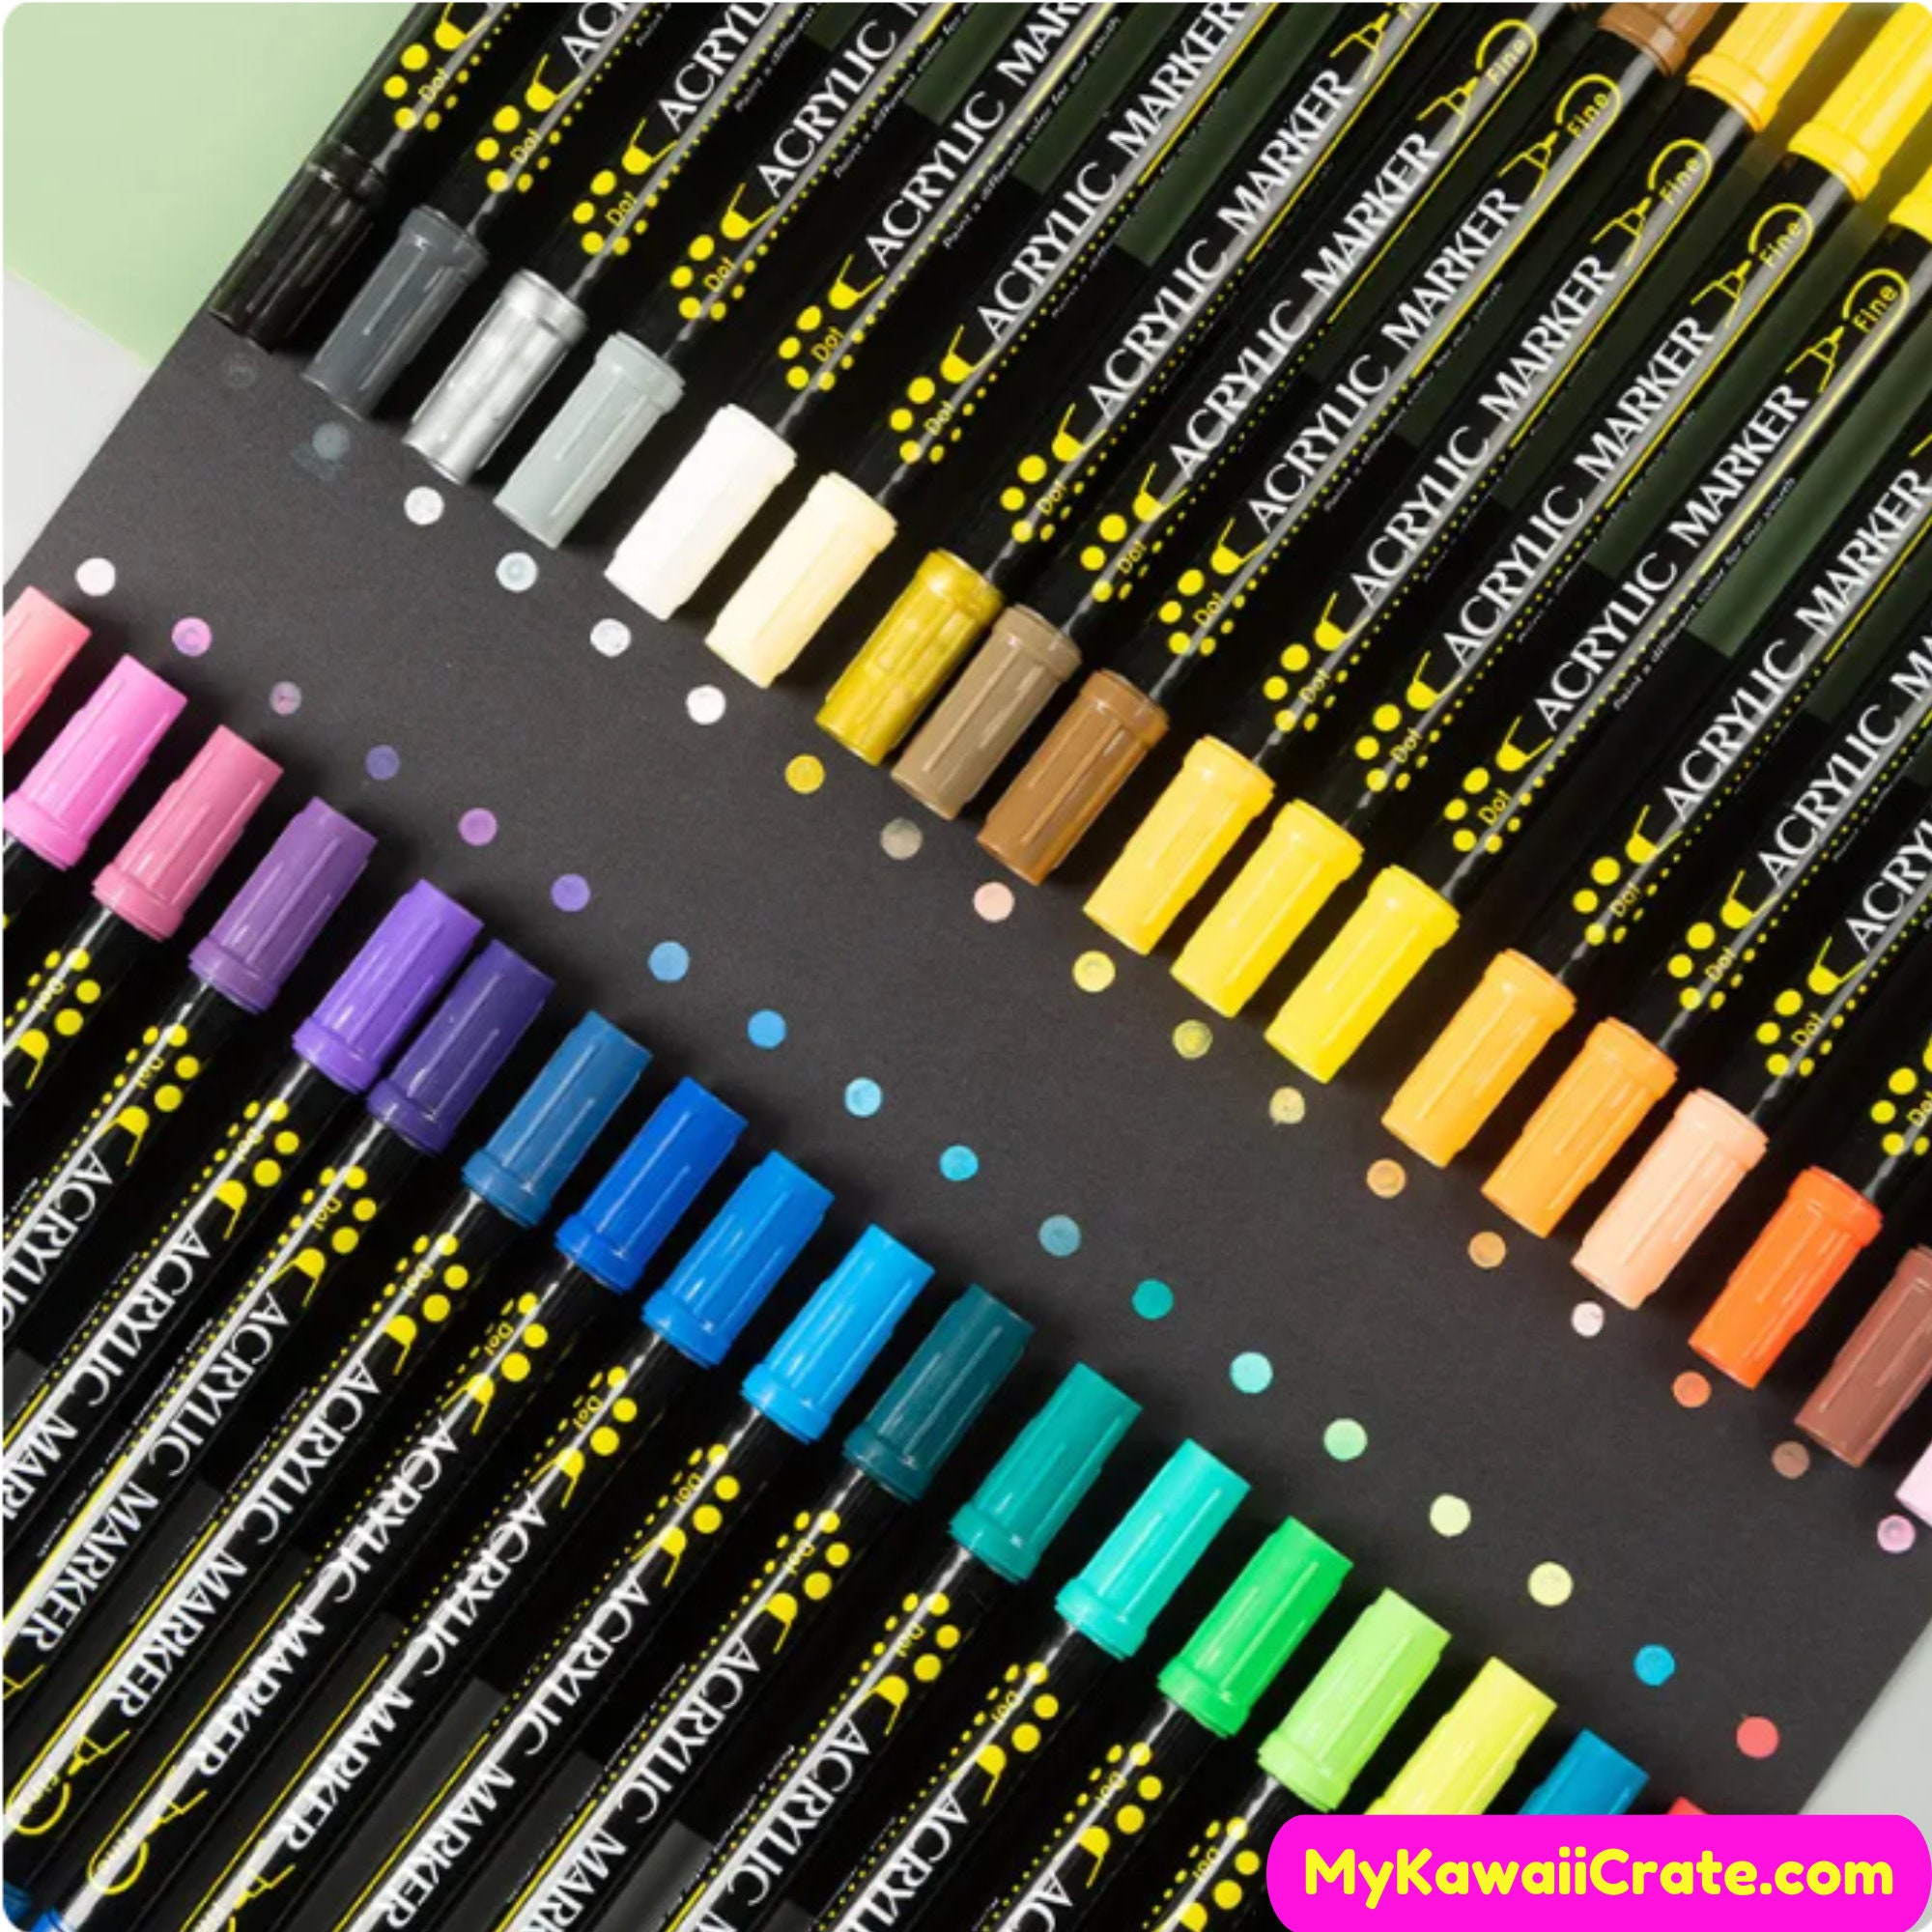 12 Colors Dual Tip Acrylic Paint Pens, 1-5MM Edium Tip and 1 MM Brush Tip,  Permanent Acrylic Markers Pens for Rock Painting,Wood,Canvas,Stone,Glass,Ceramic,  DIY Crafts Making Art Supplies 